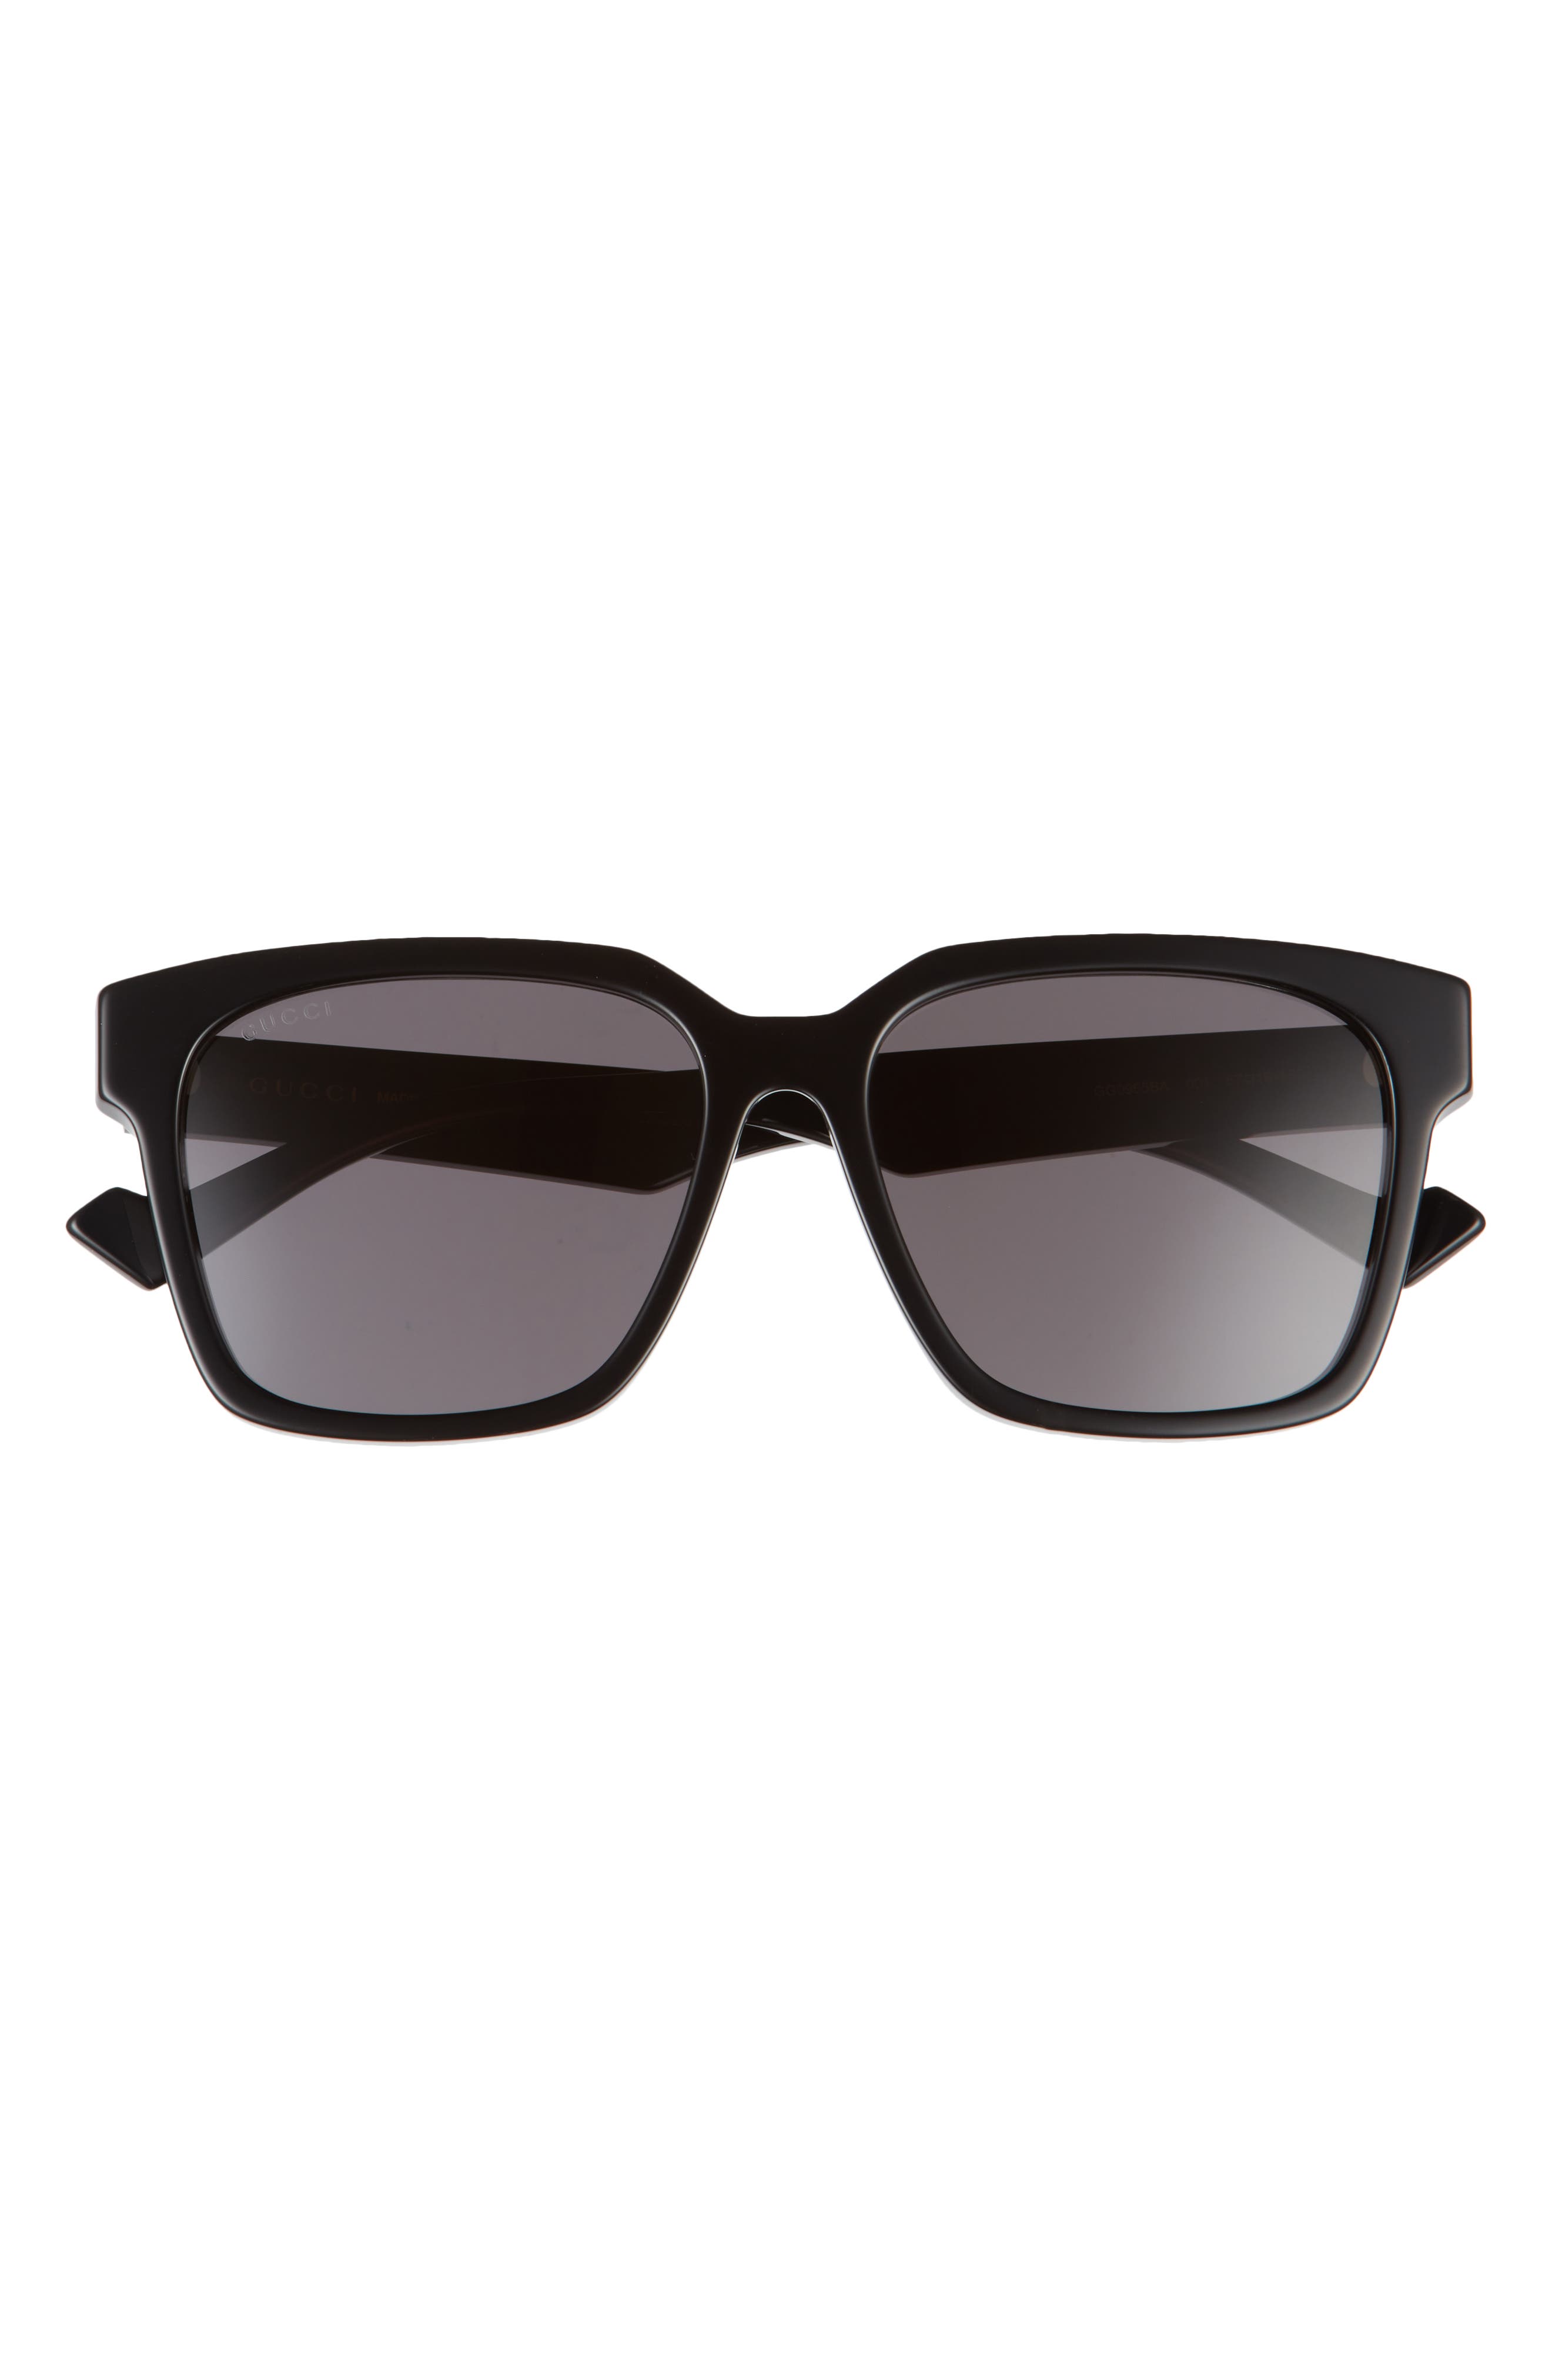 Gucci 57mm Square Sunglasses in Black/Grey at Nordstrom